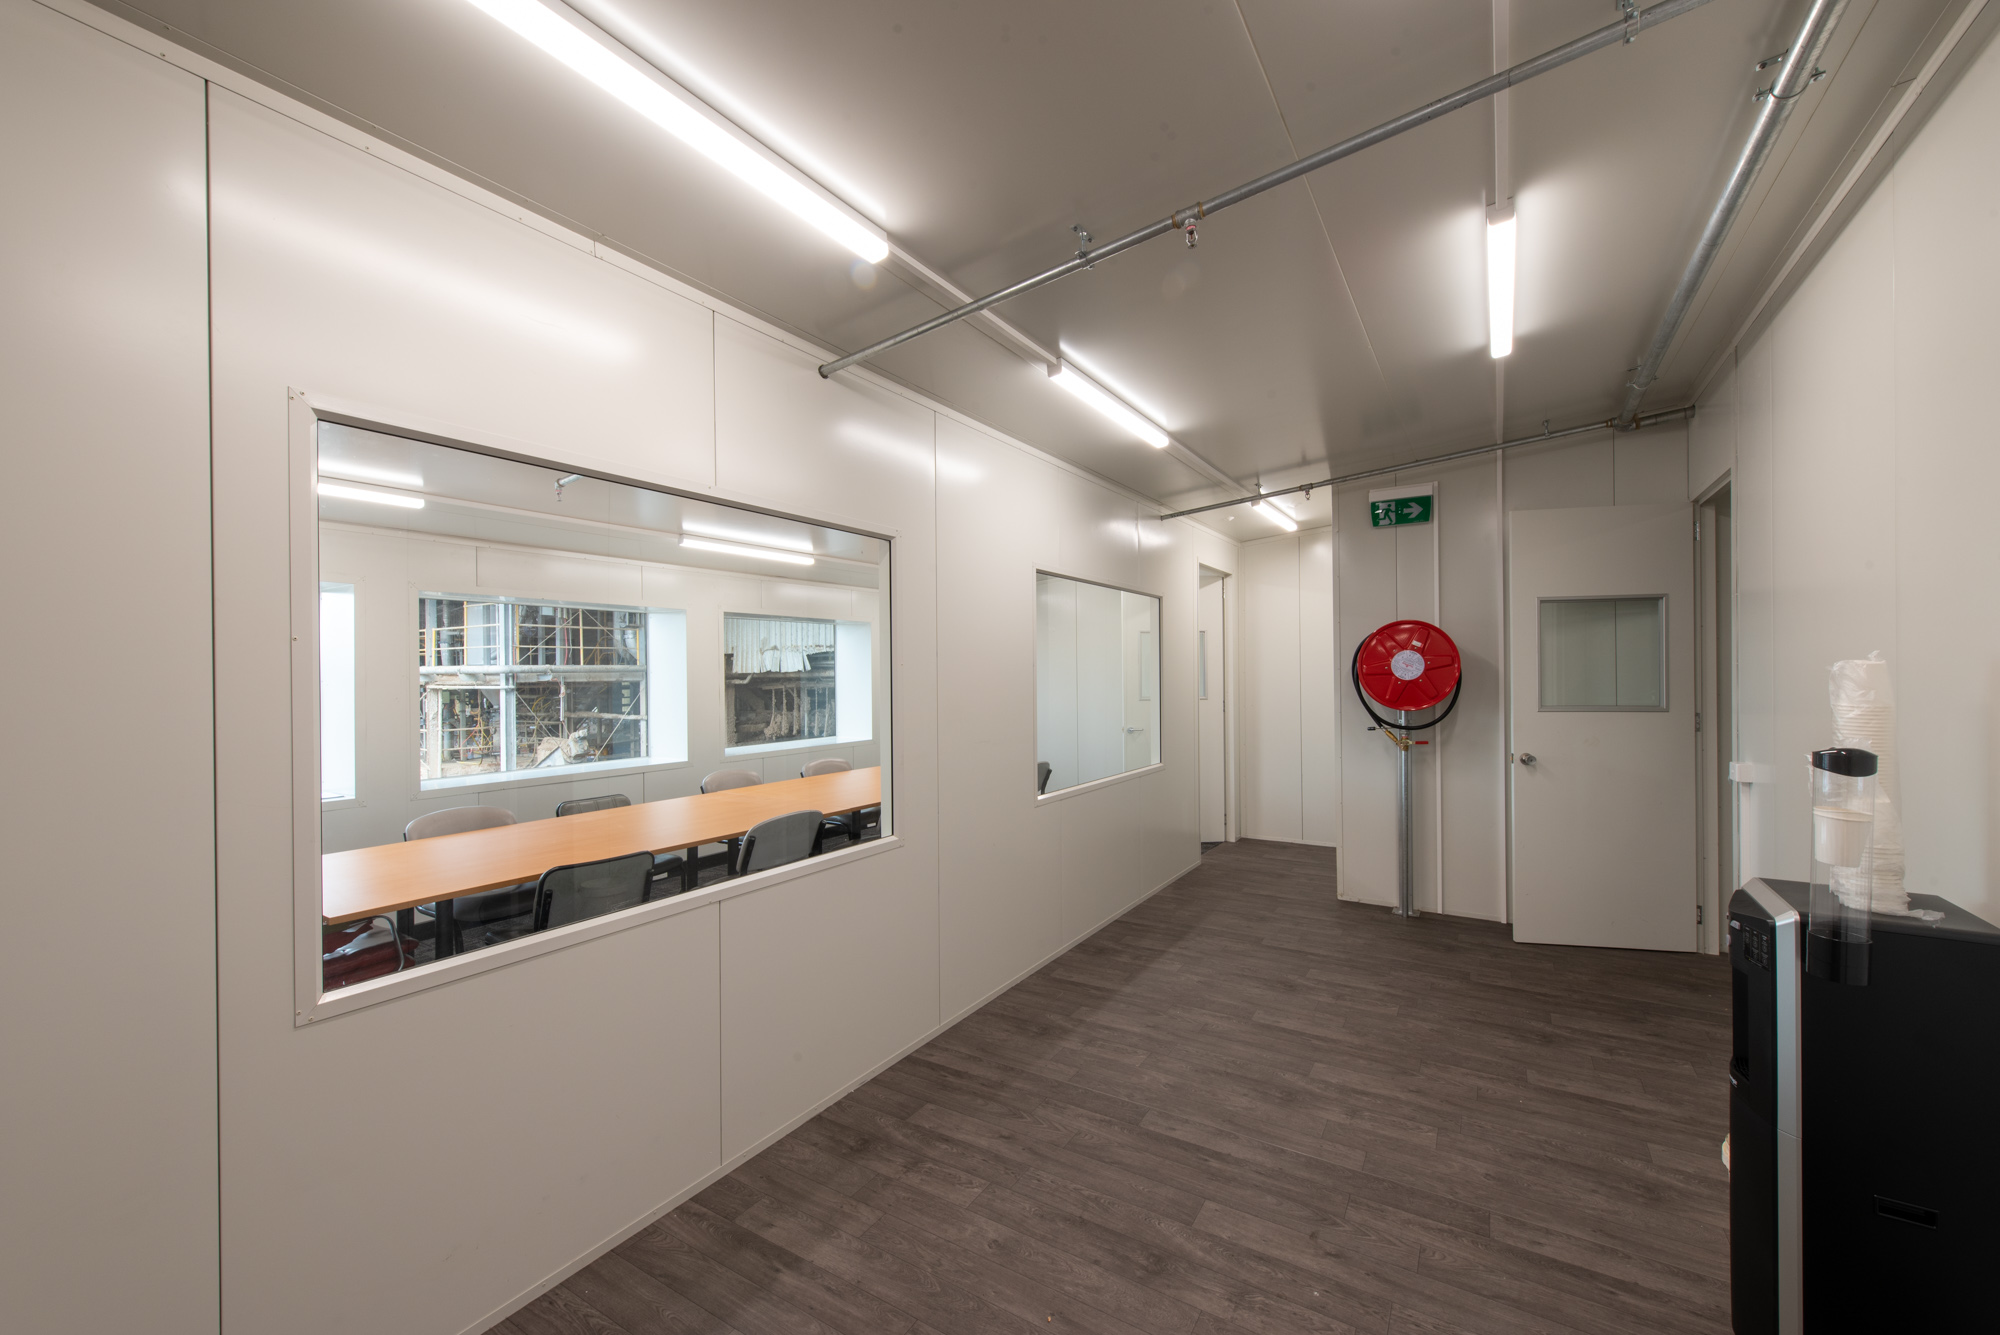 Office facility upgrades project for VISY Company by Heighton